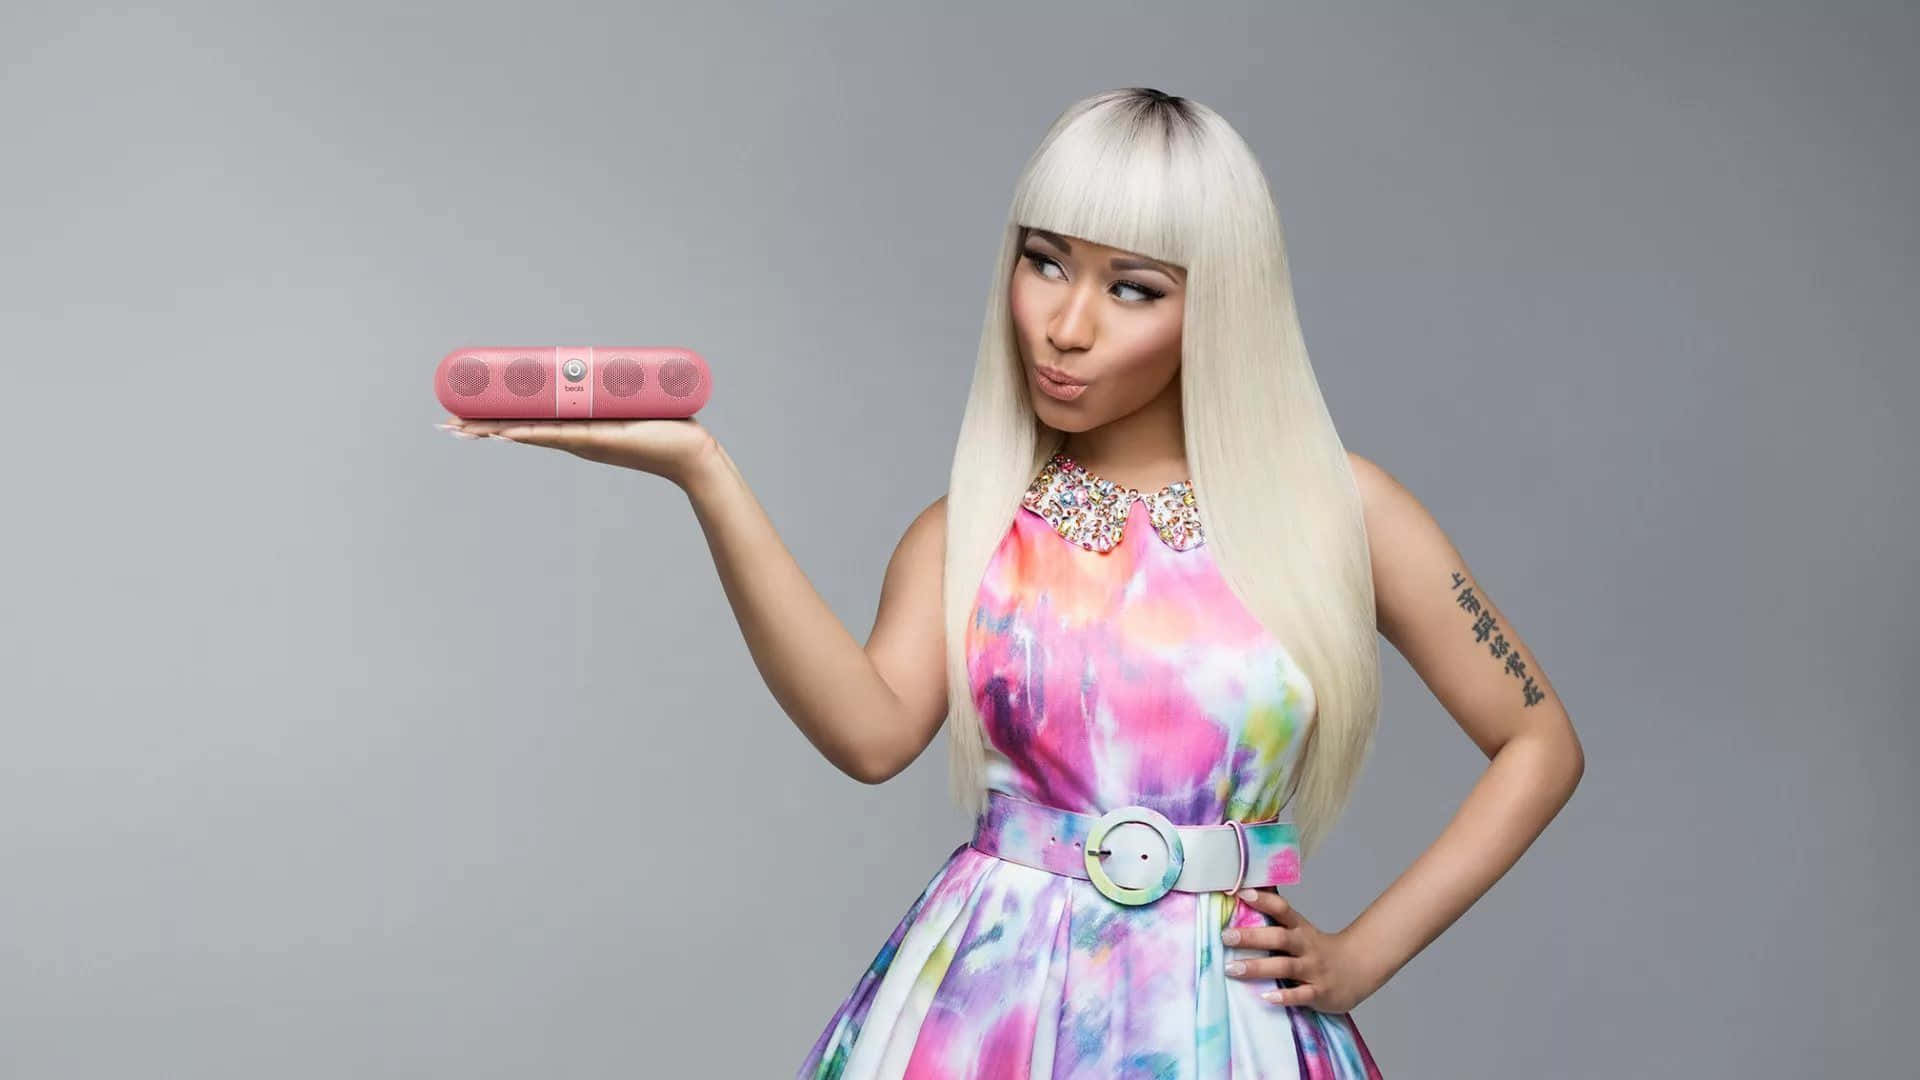 Nicki Minaj posing confidently in a colorful outfit